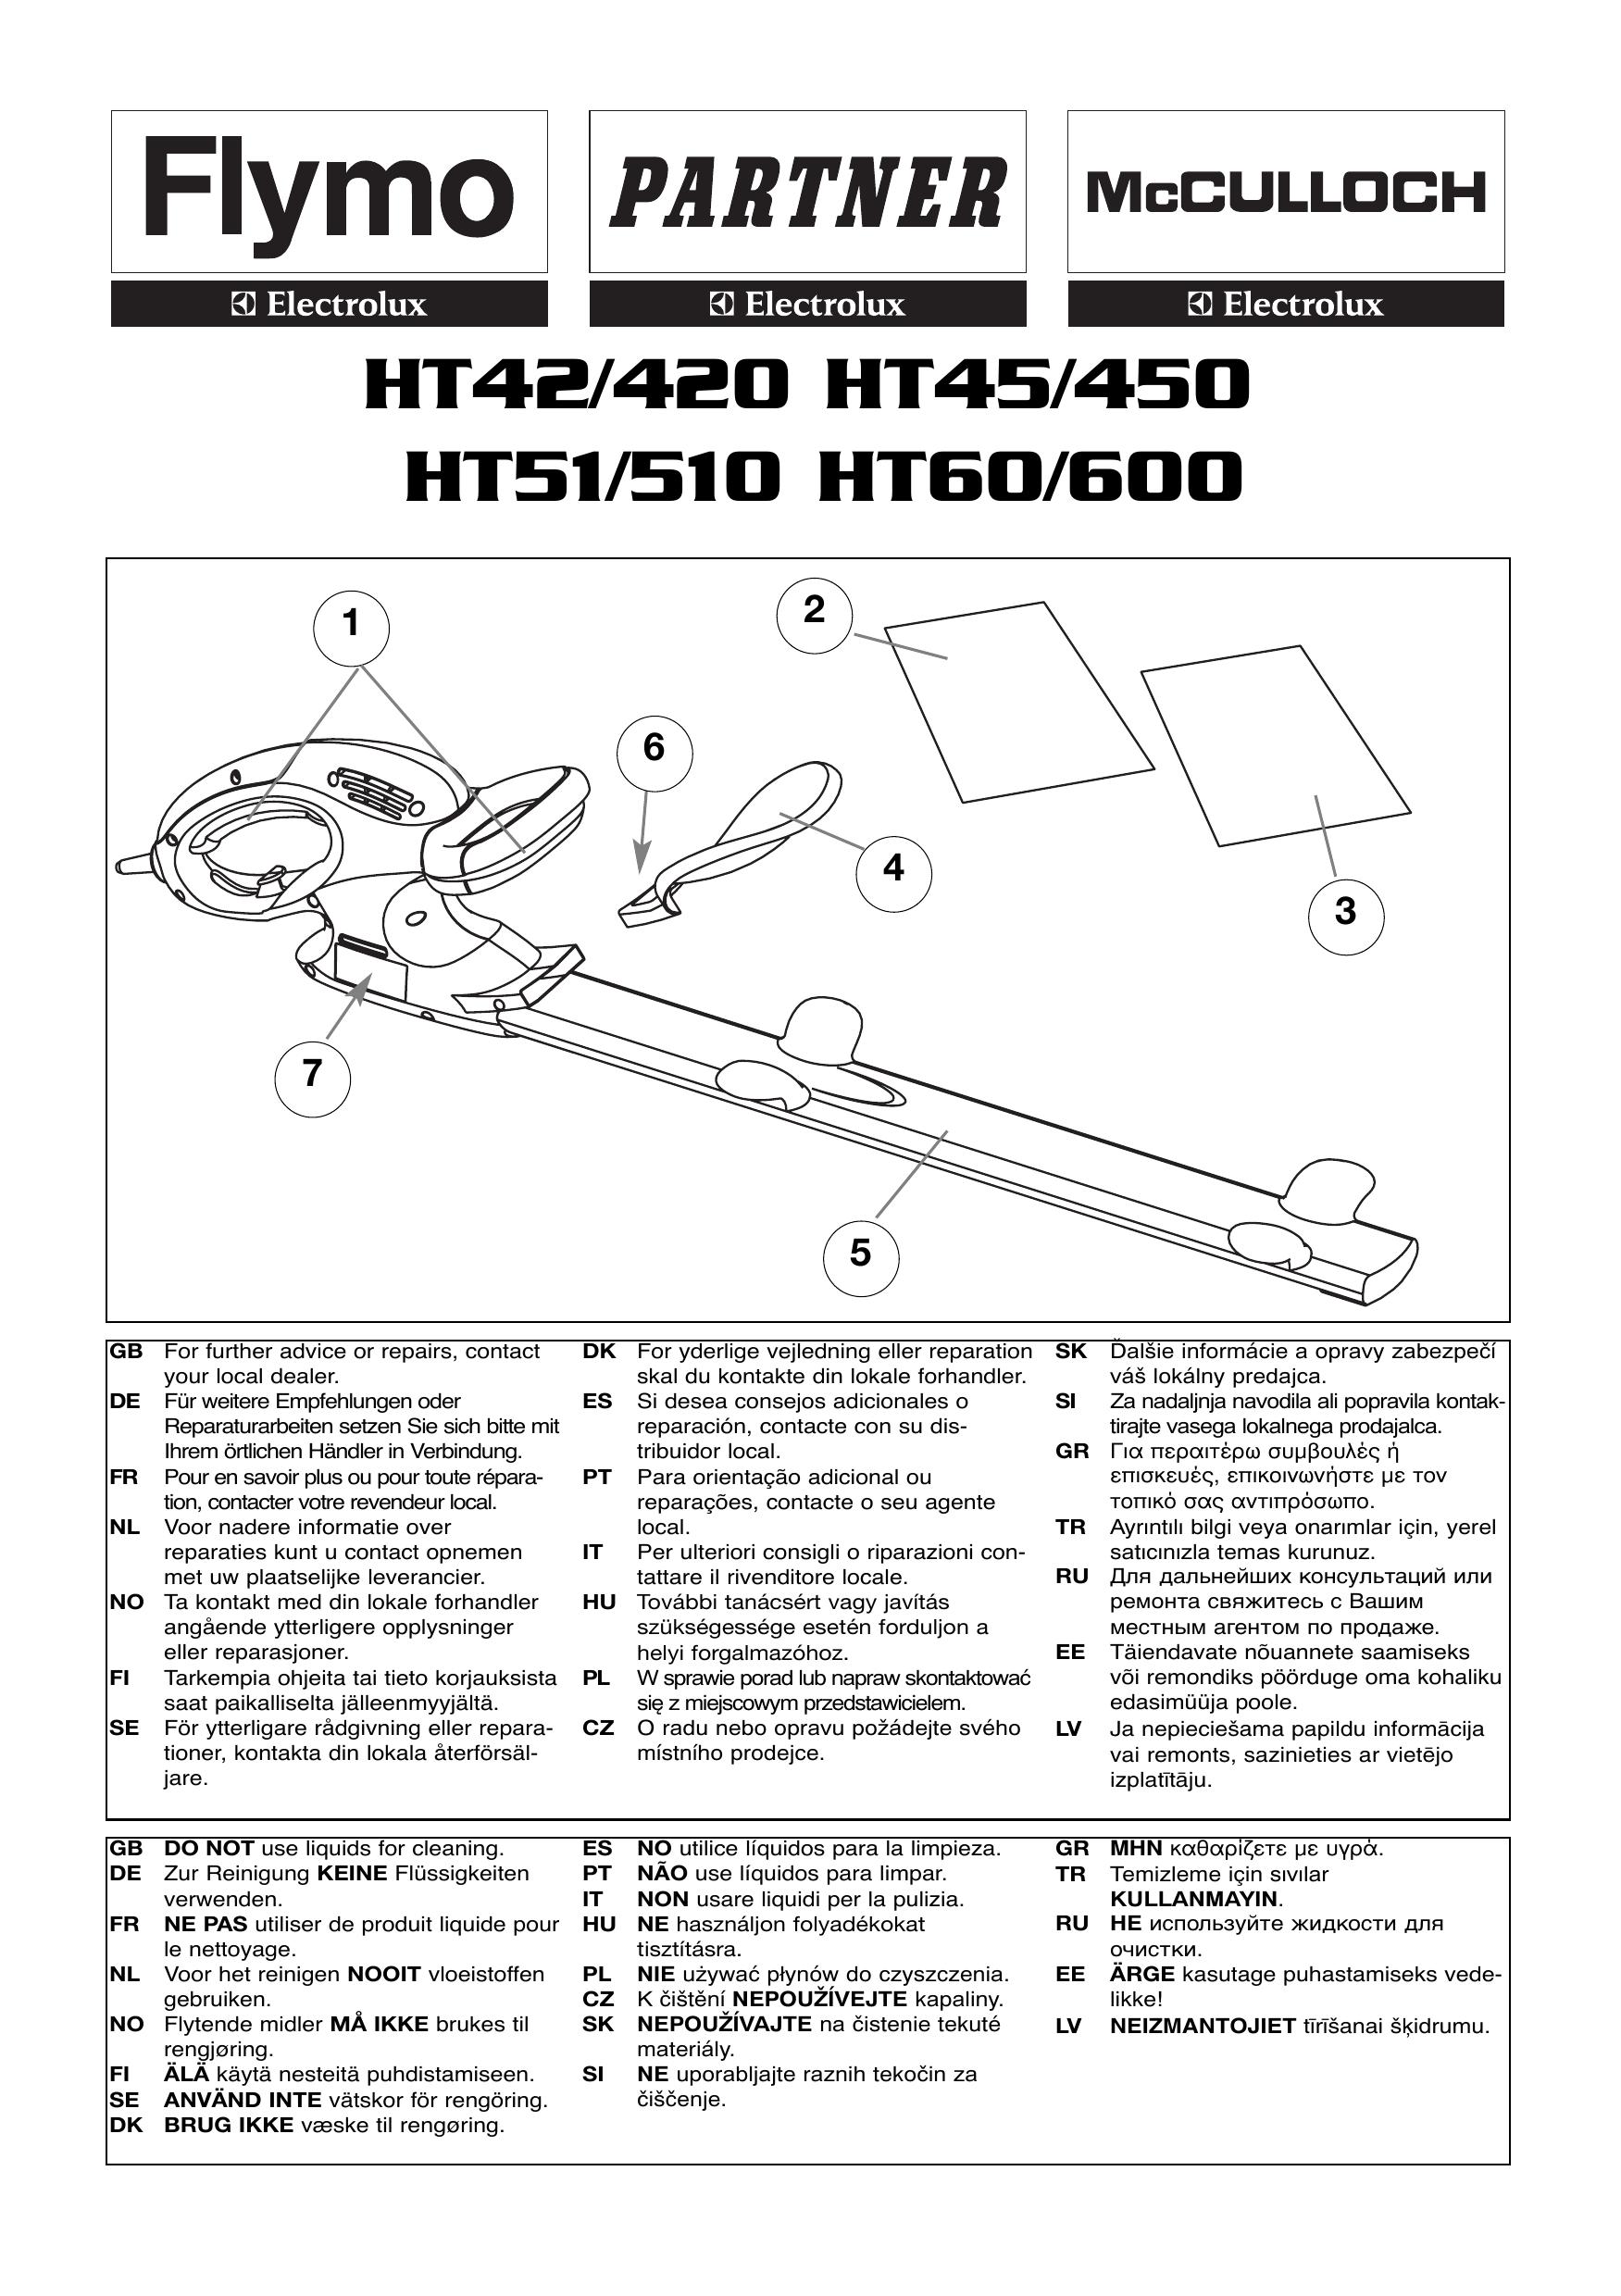 Flymo HT42/420 Trimmer User Manual